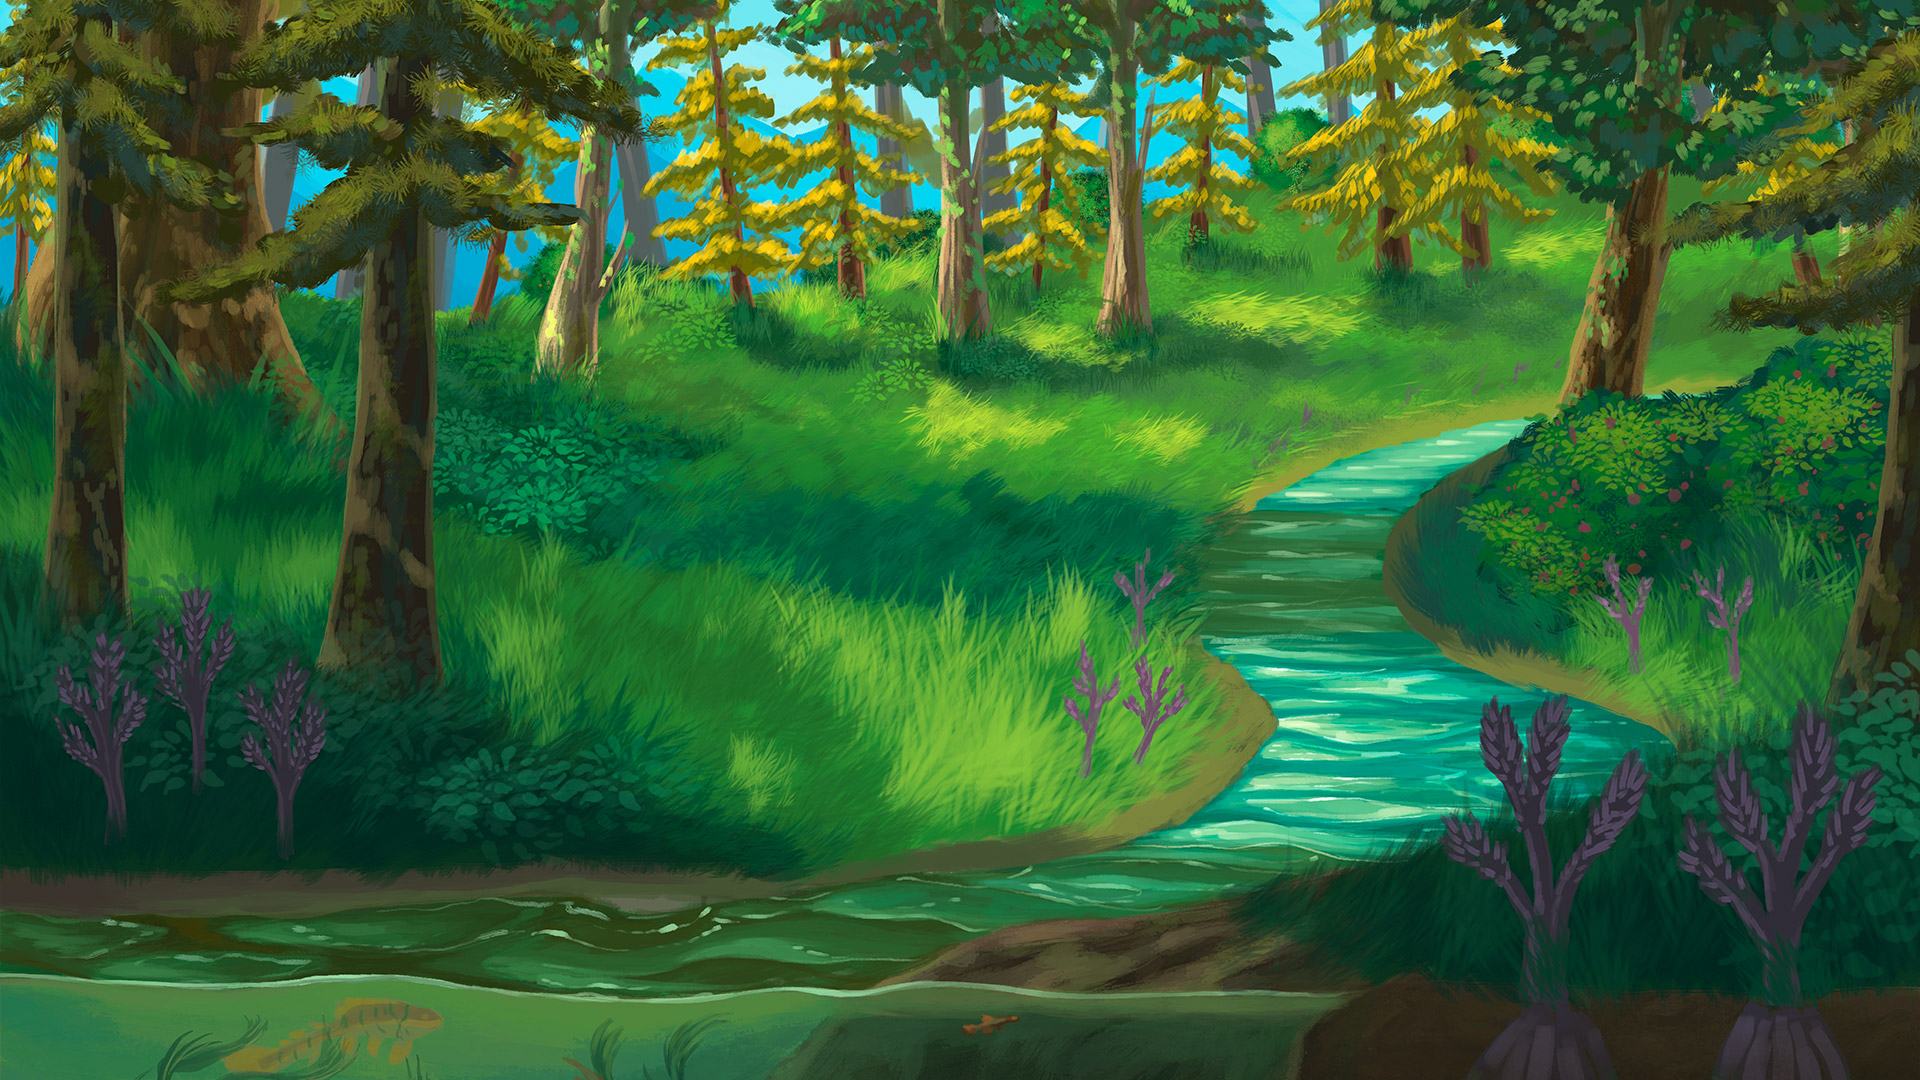 Crystal Woo | Illustration | Environmental concept for an educational video game